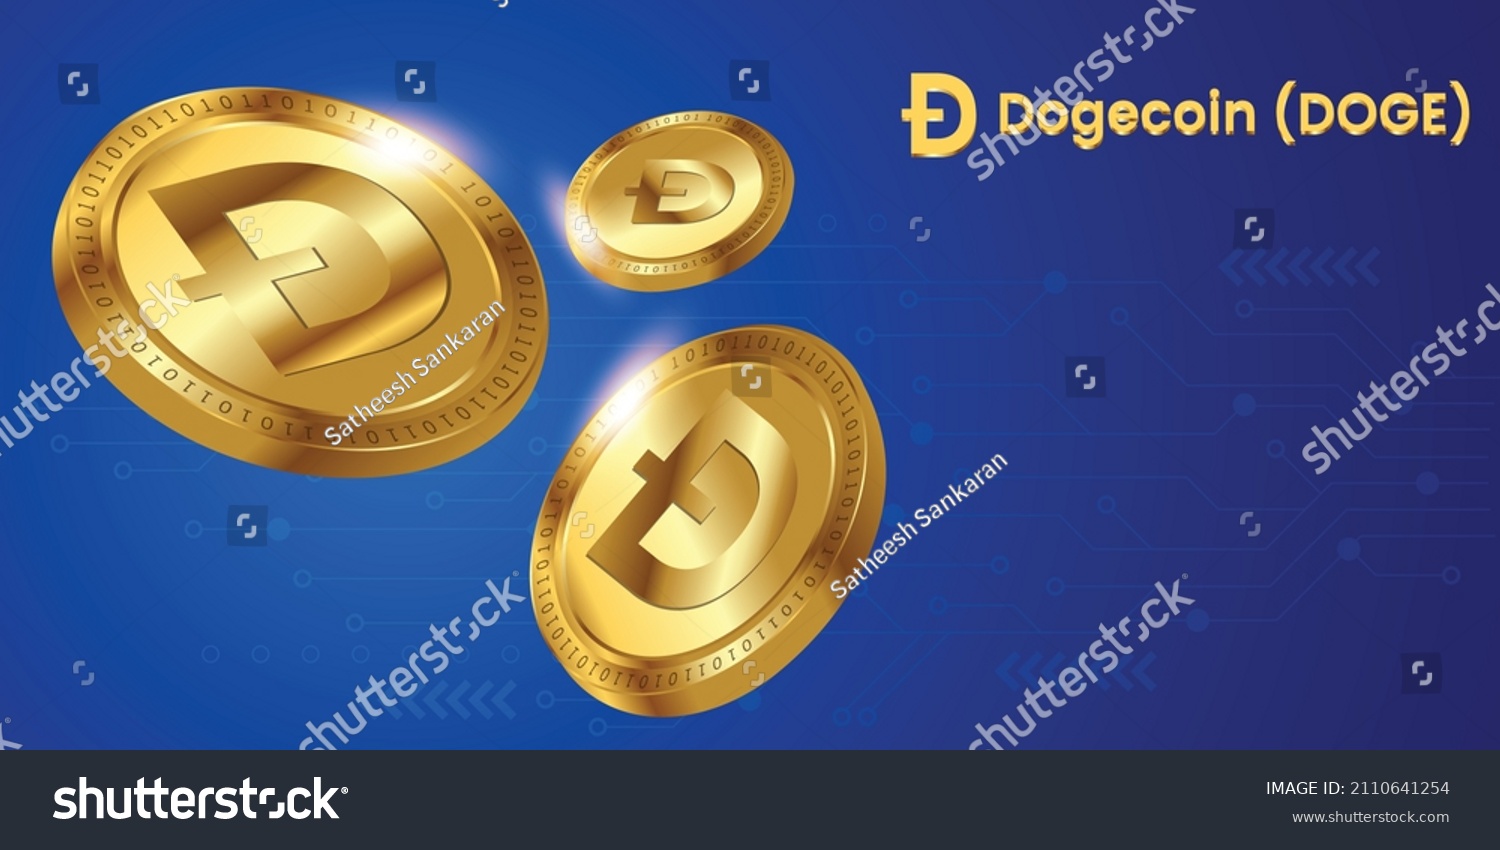 SVG of Dogecoin DOGE cryptocurrency banner vector illustration with logo in golden coin template svg